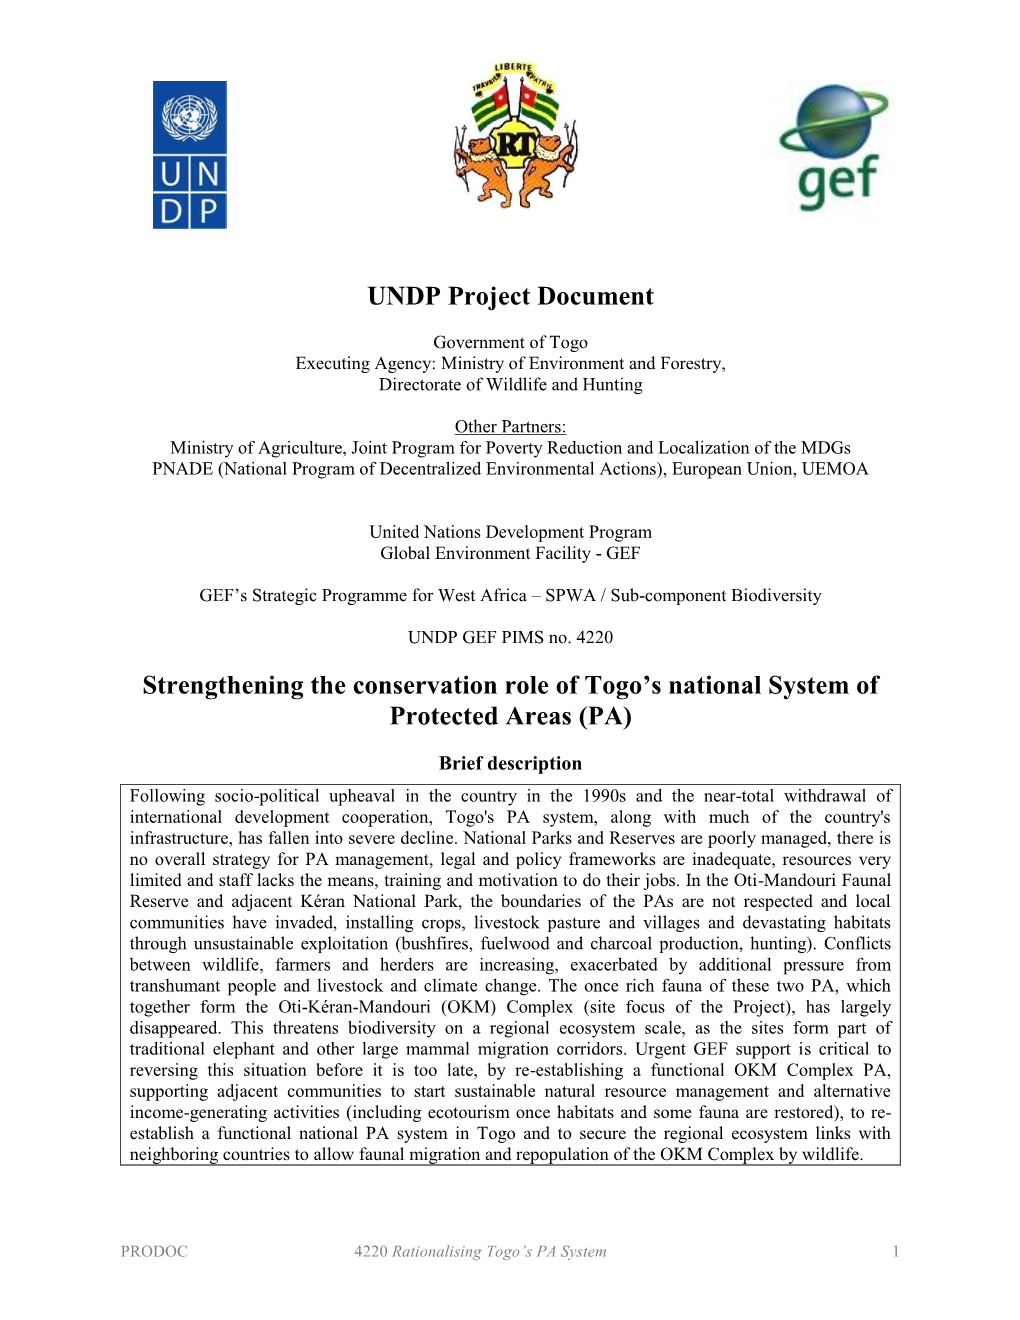 UNDP Project Document Strengthening the Conservation Role